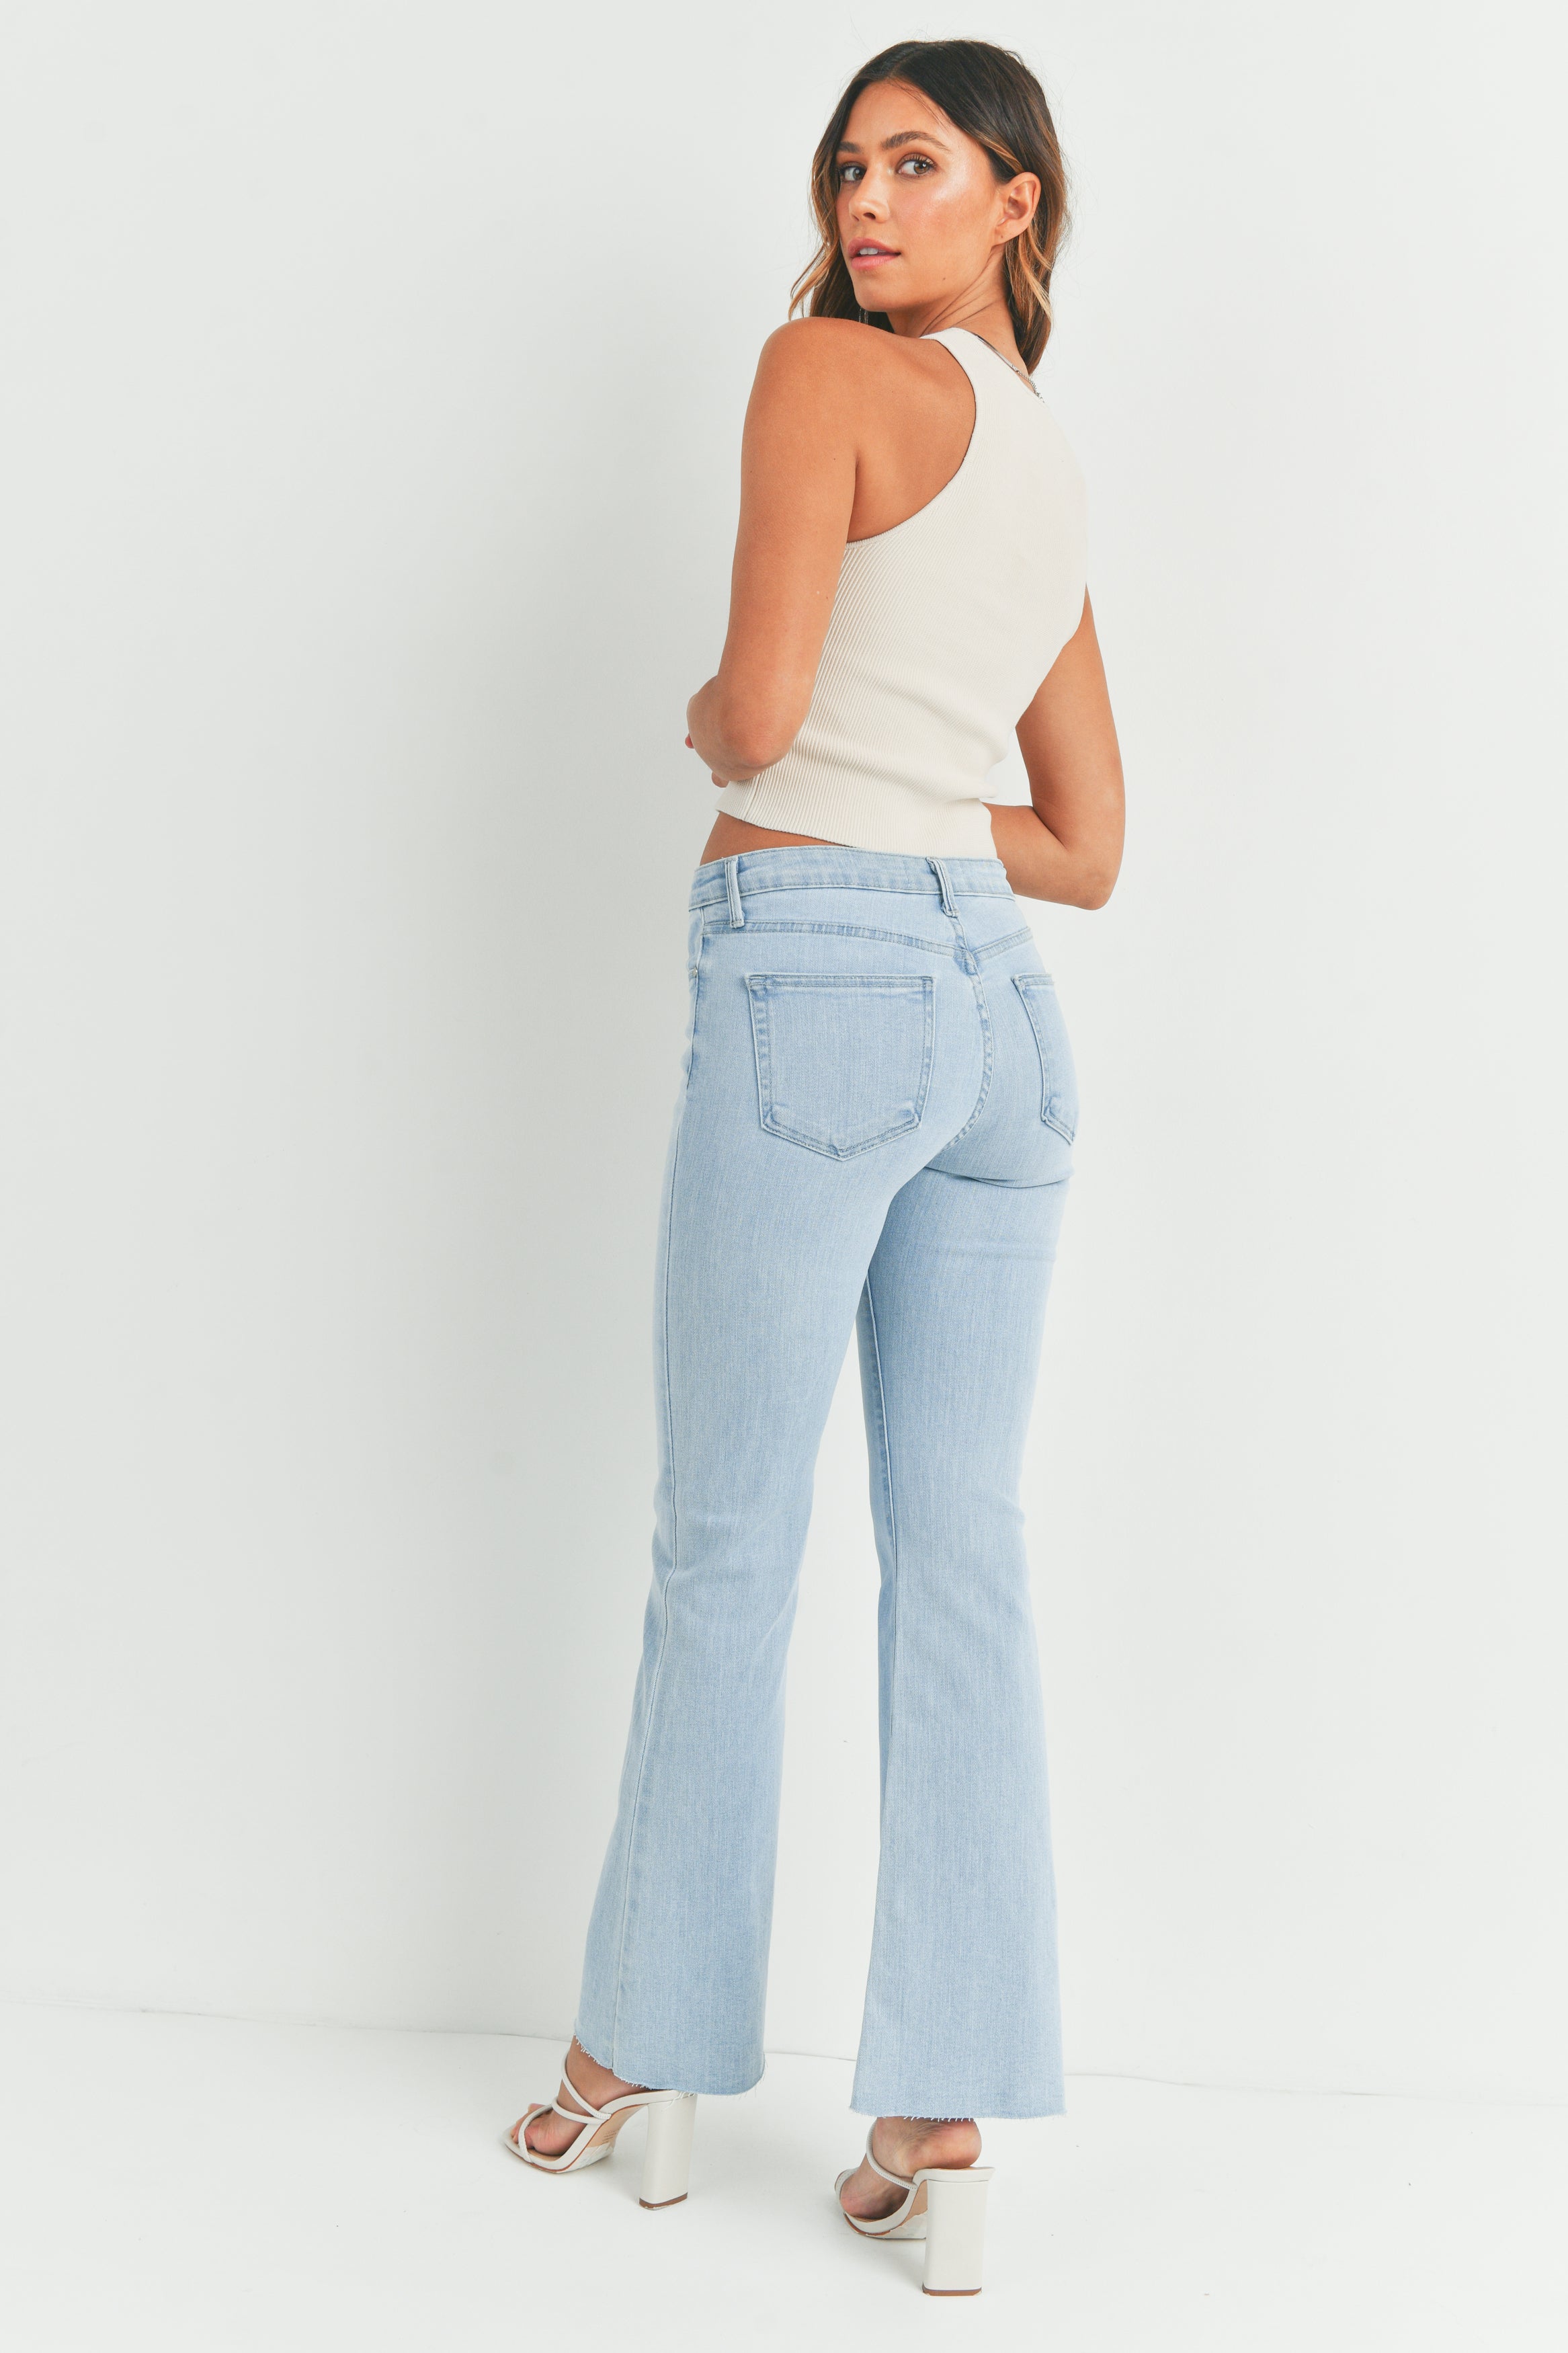 Jeans Hr Cut Flare